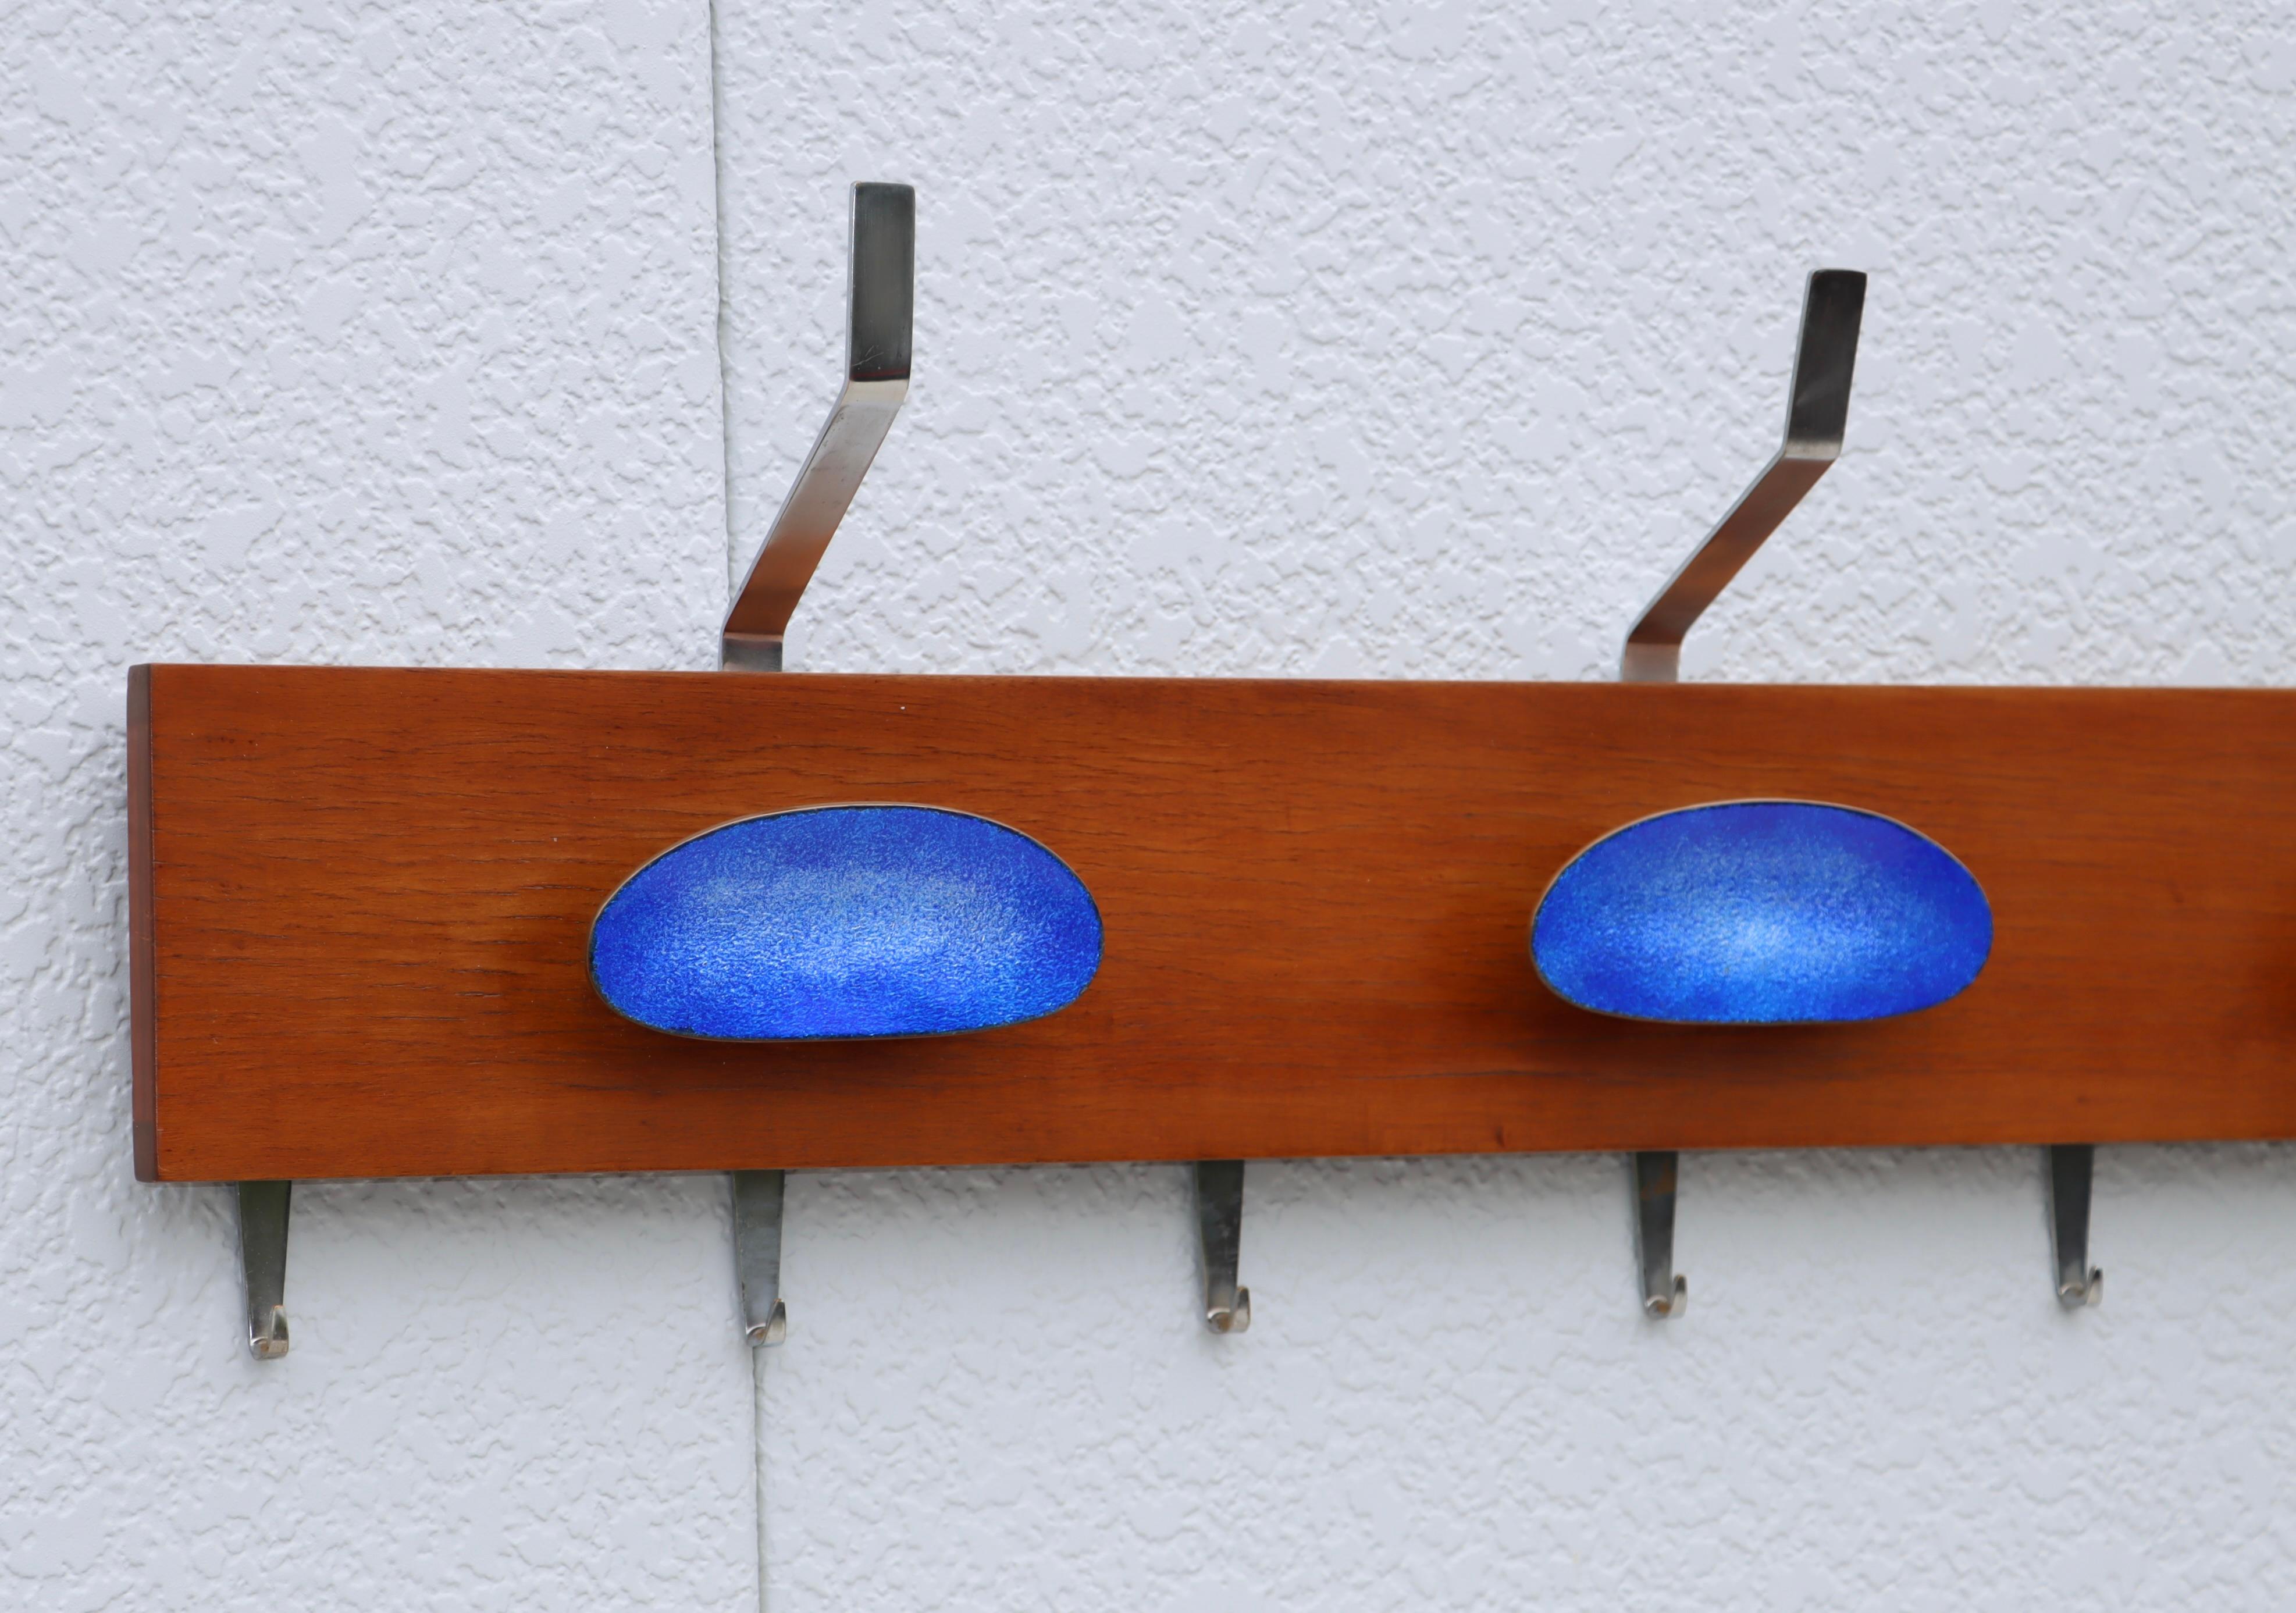 Paolo De Poli Attributed Enamel and Walnut Wall Mounted Coat Rack For Sale 5